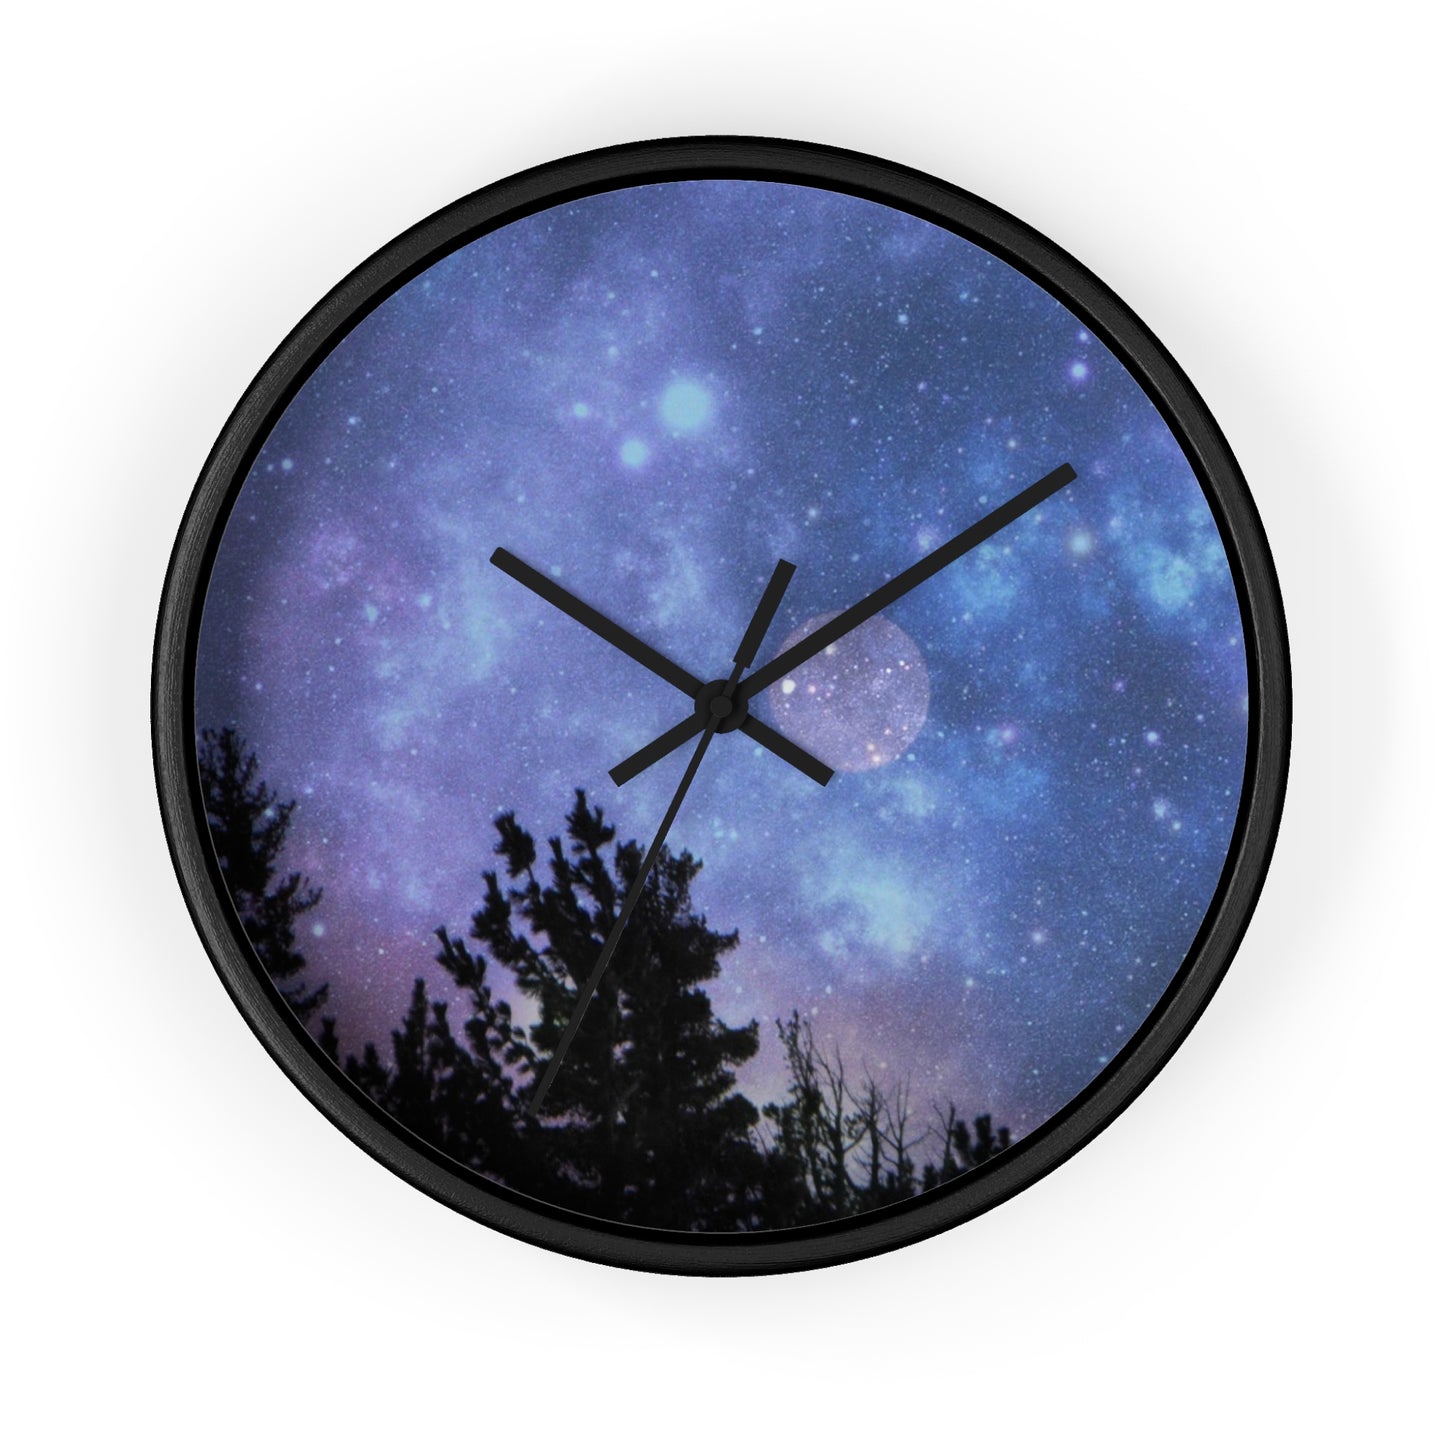 An American made Blue-Moon Wall Clock by Printify featuring a design of a night sky and silhouetted trees on its face.